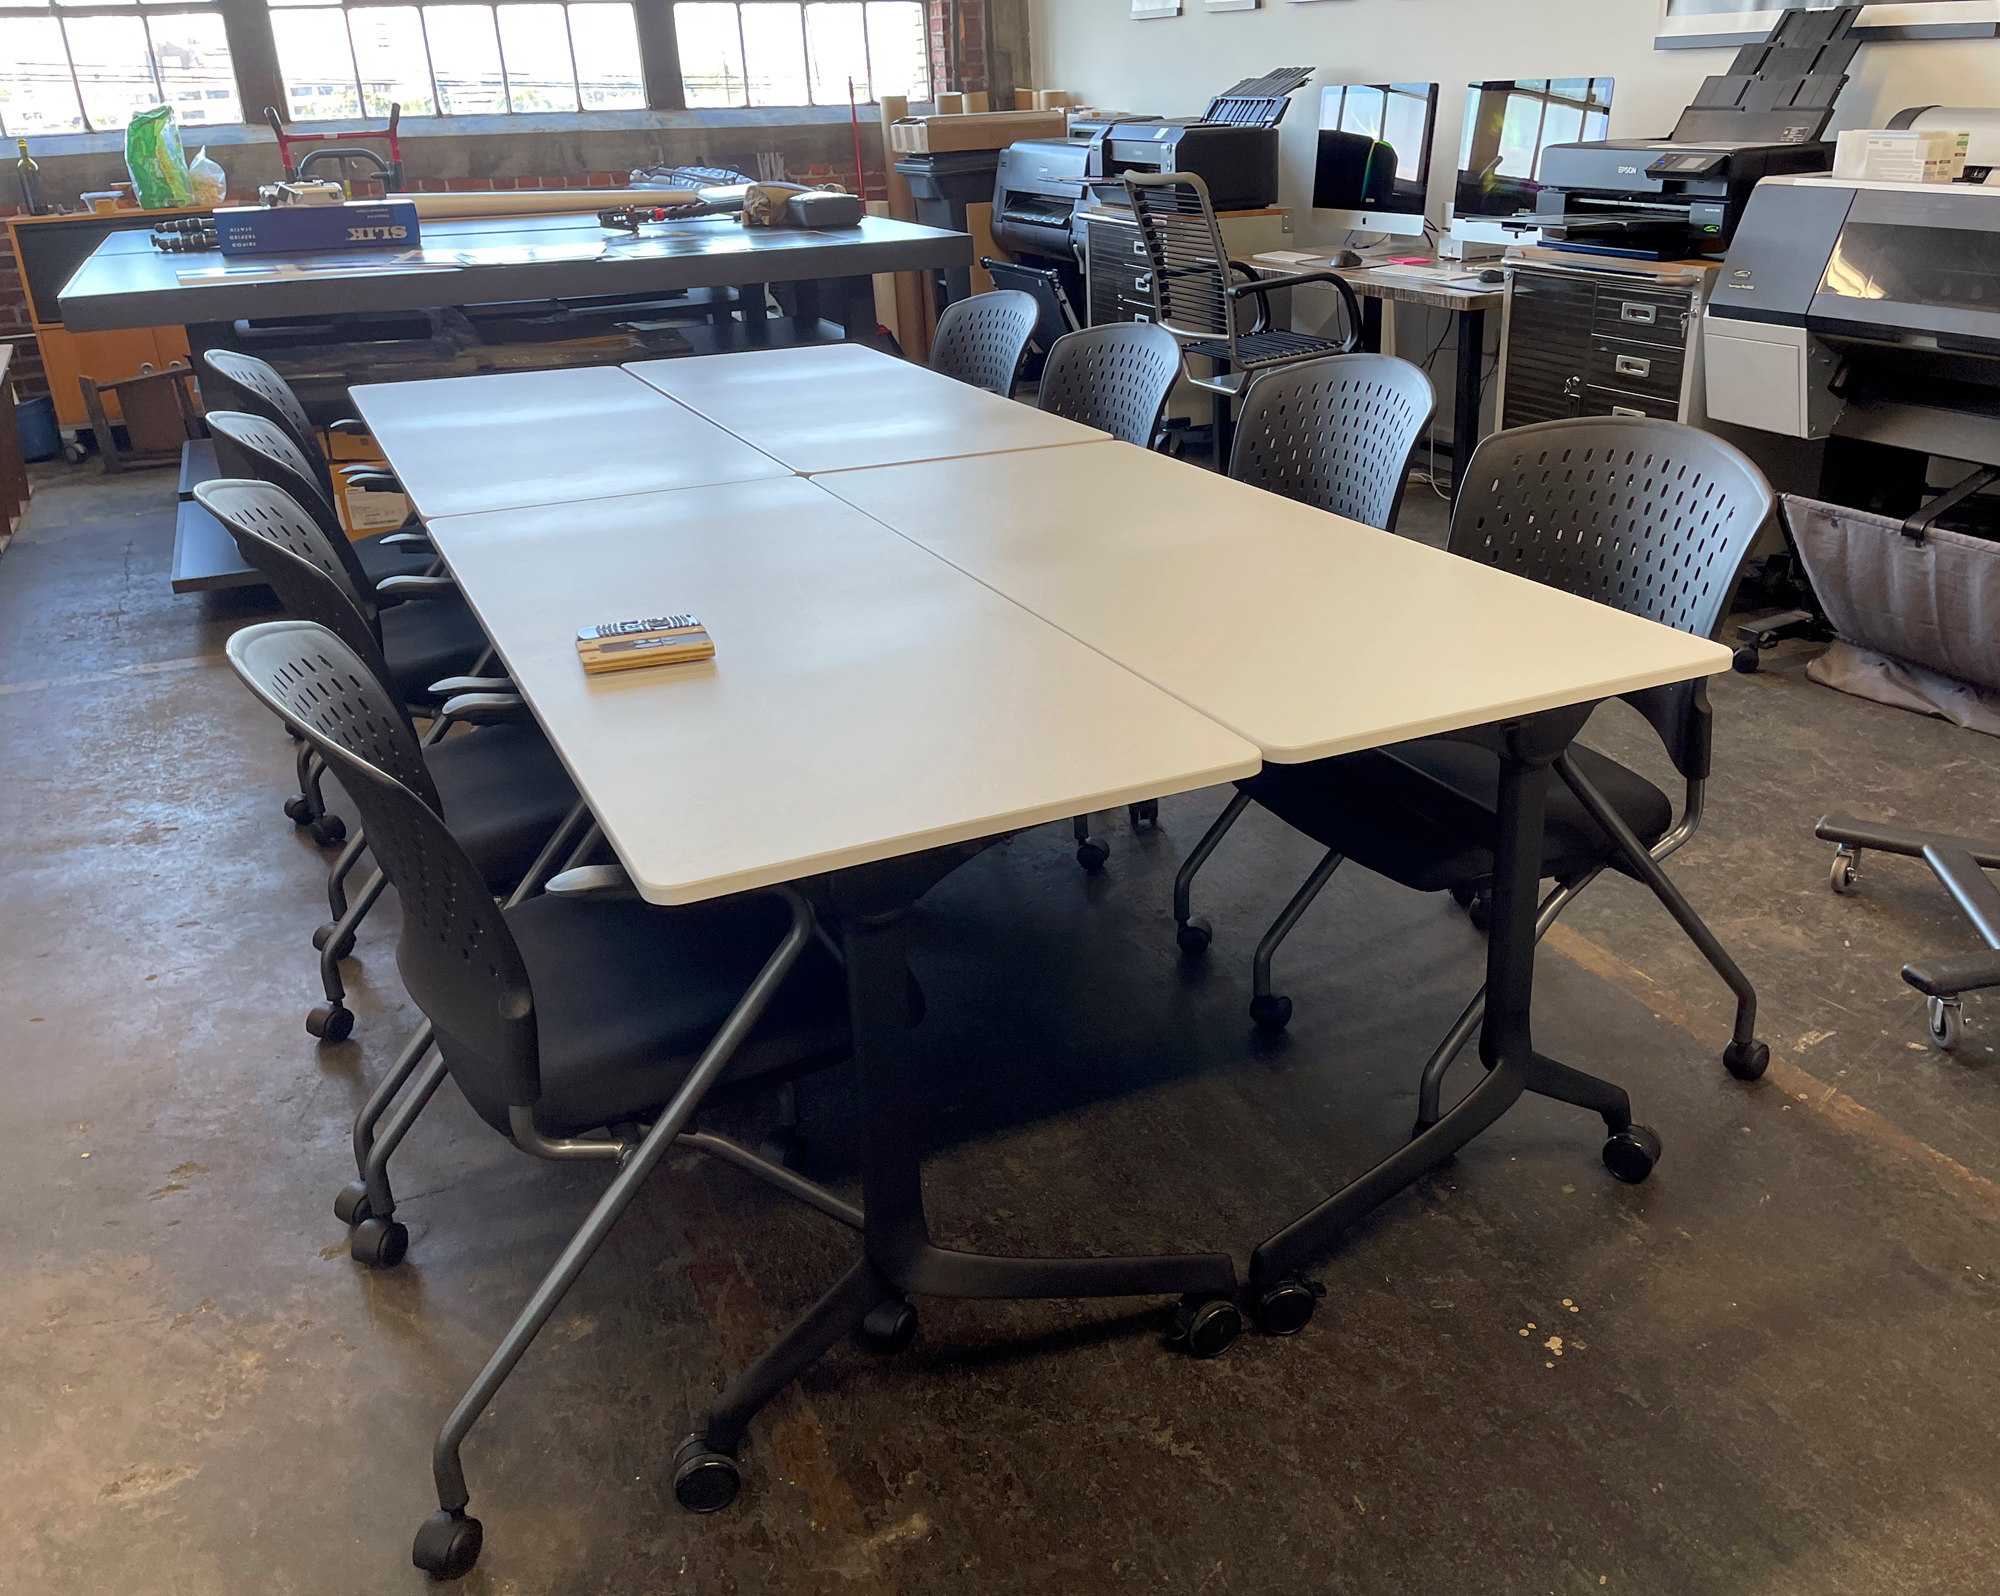 Our classroom tables can be configured a few ways